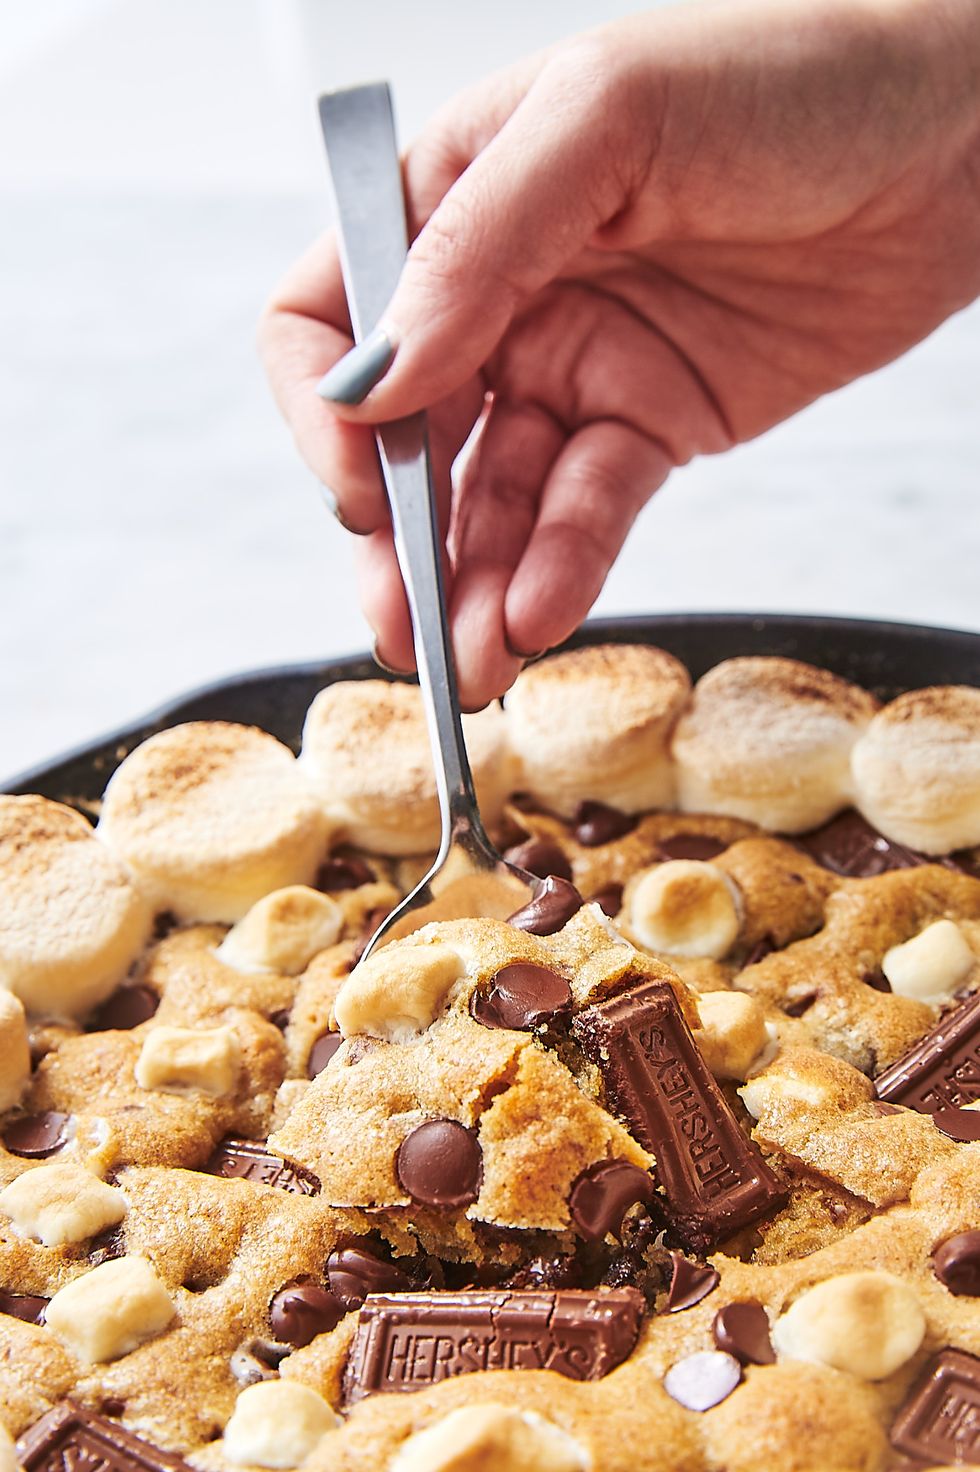 Chocolate S'more Making Kit, Stuffed with Potato Chips